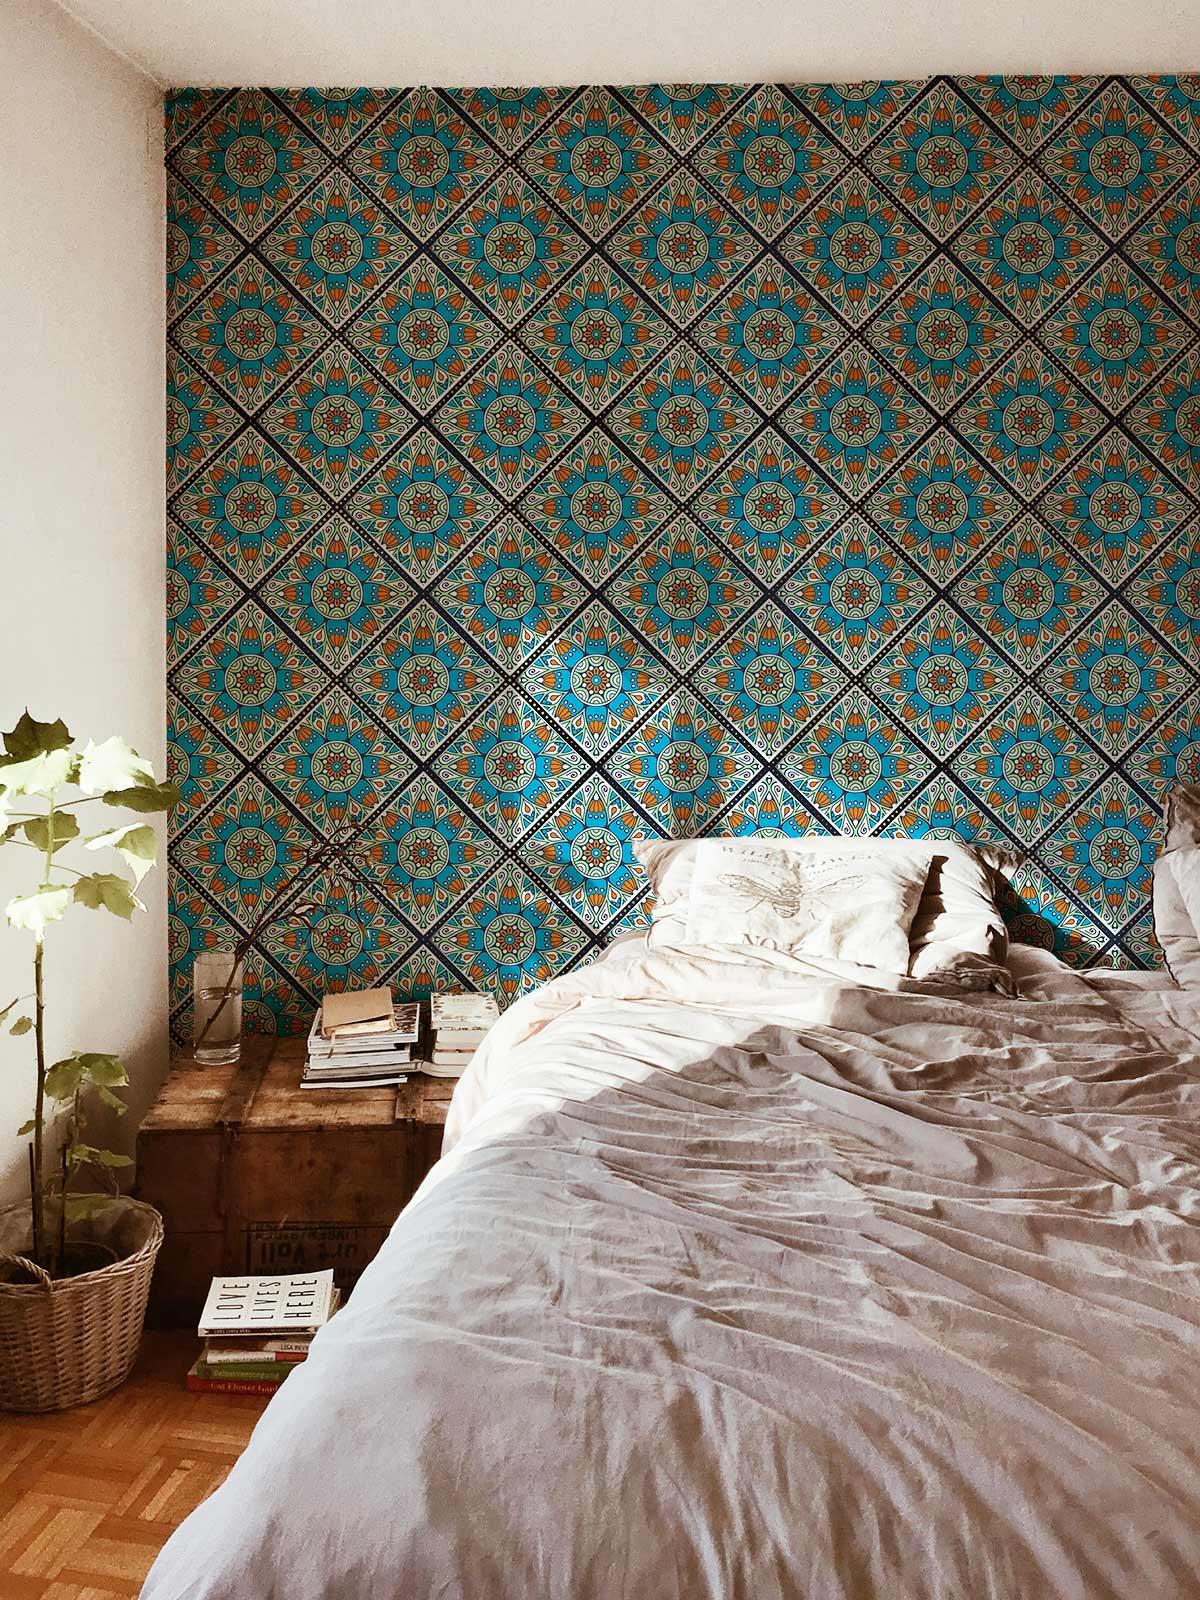 design for a bedroom with a vintage and exquisite pattern wall mural